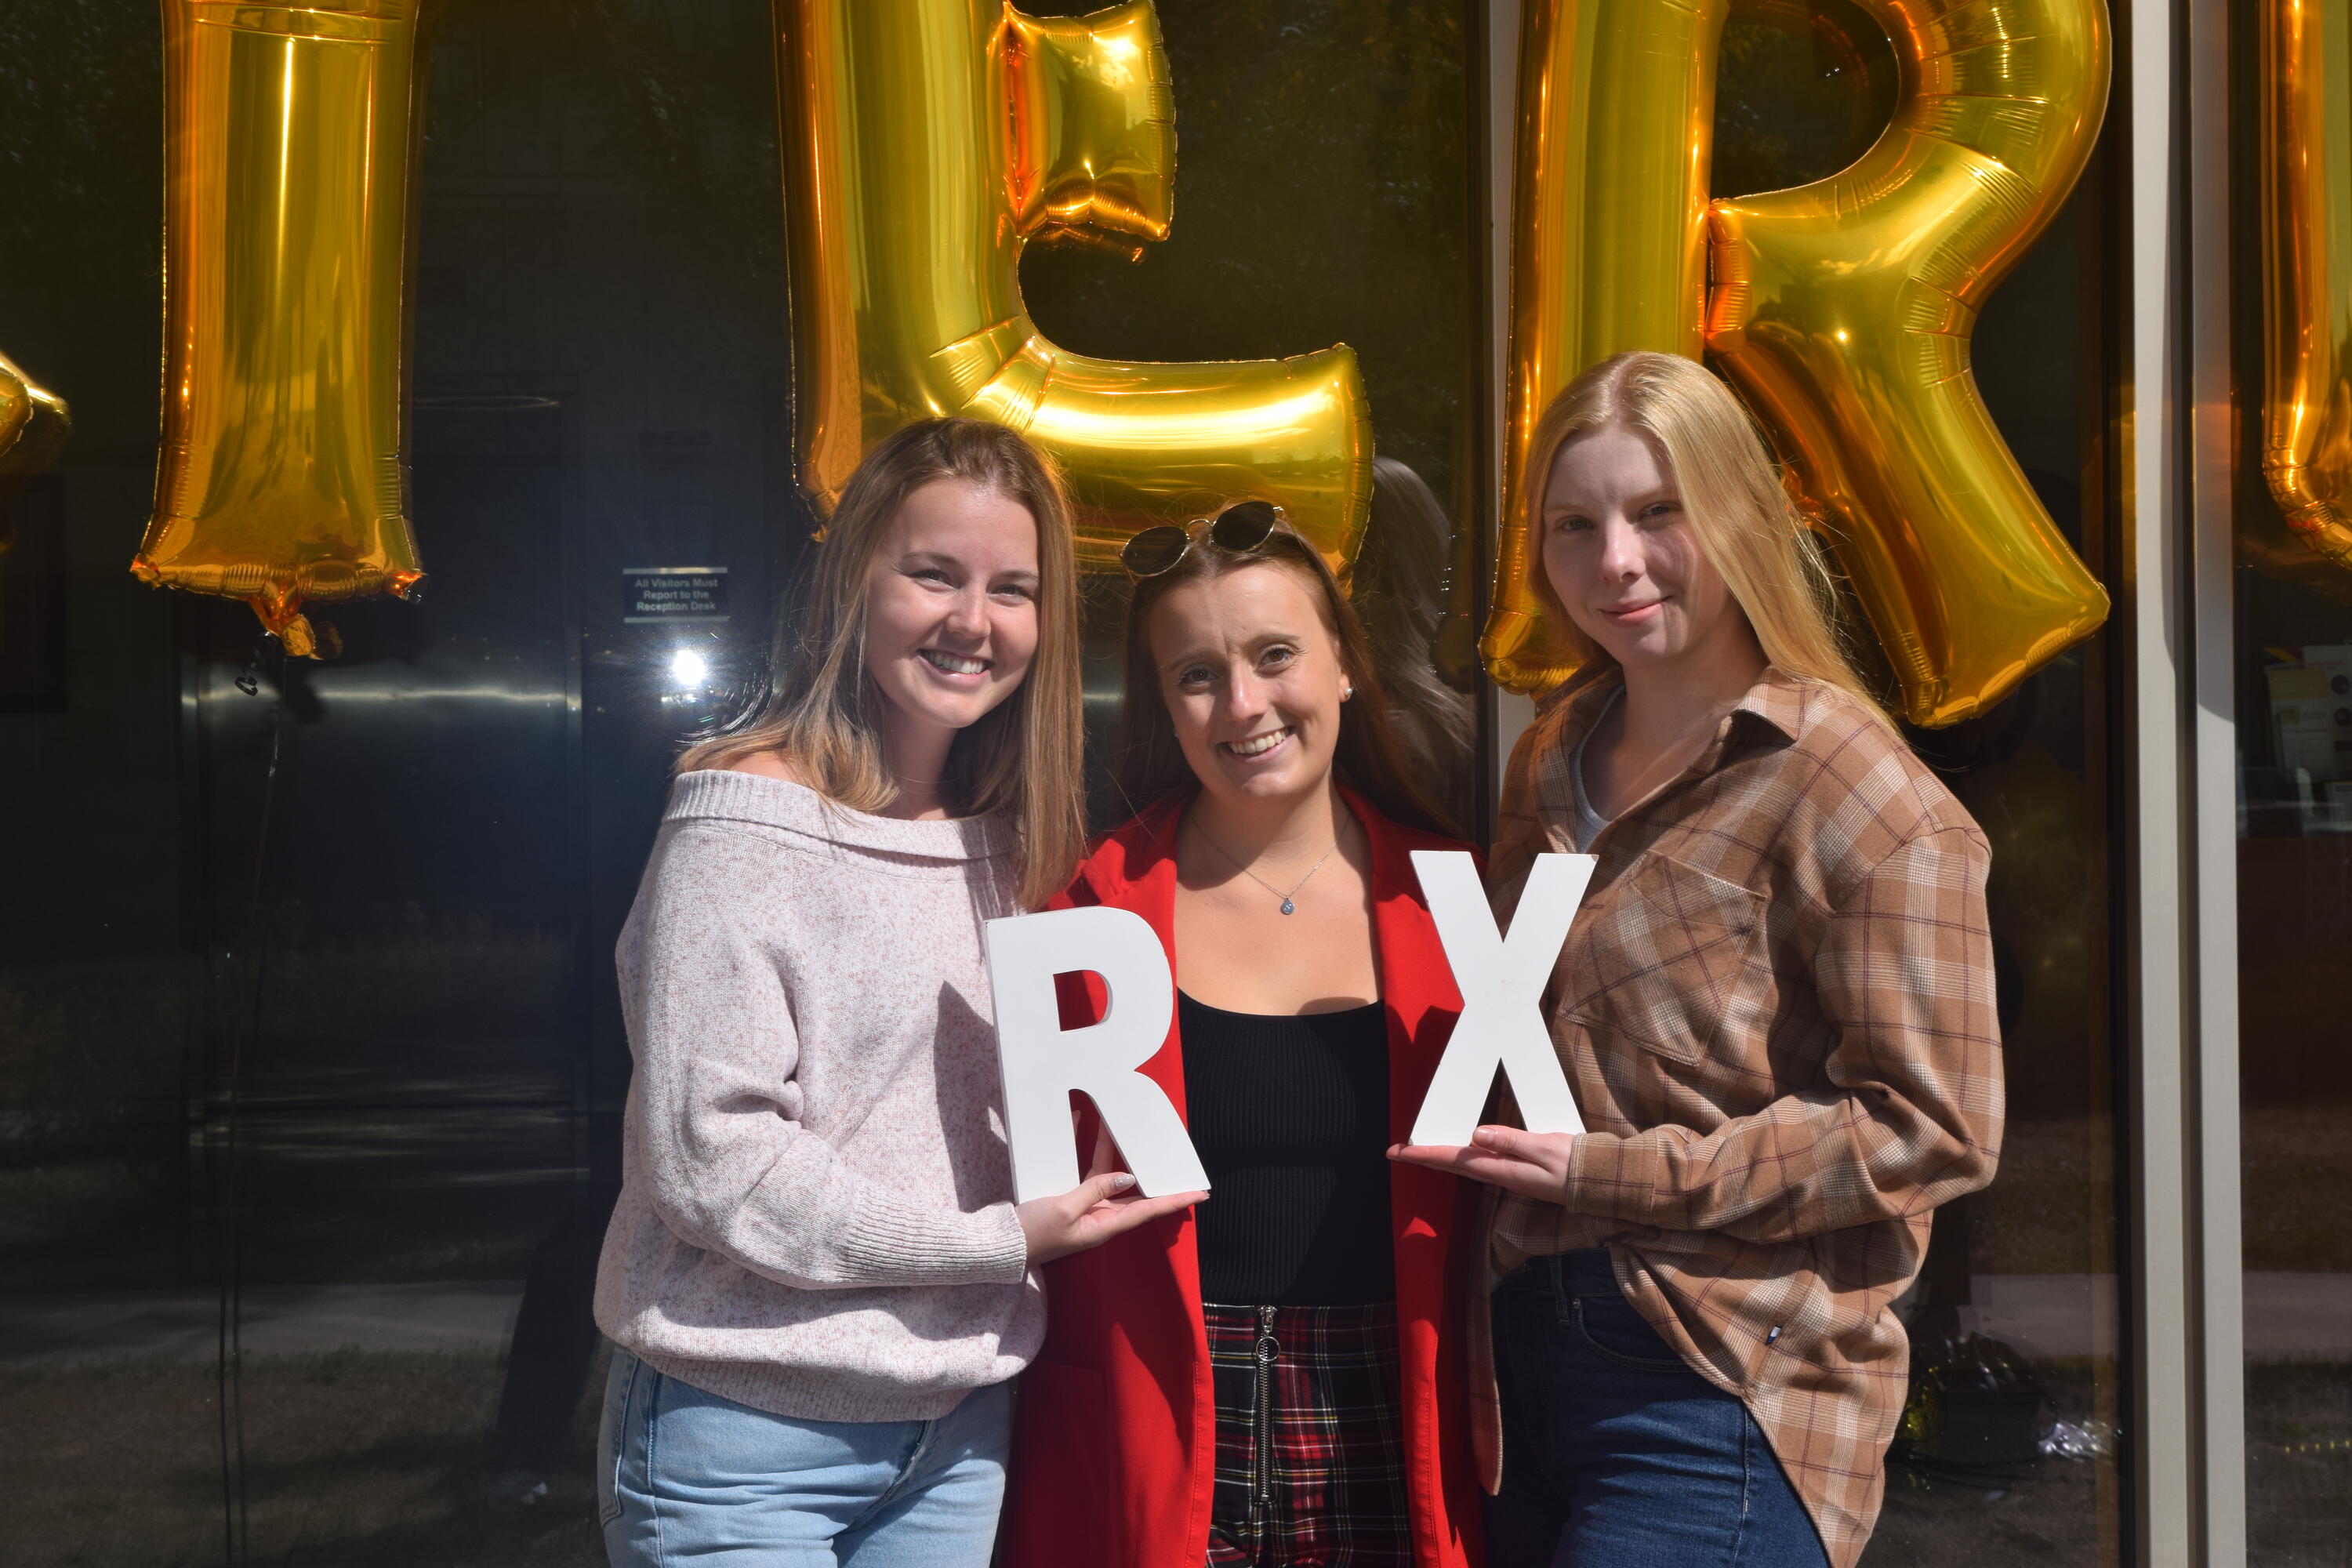 Three women smiling while holding up the letters "Rx" 